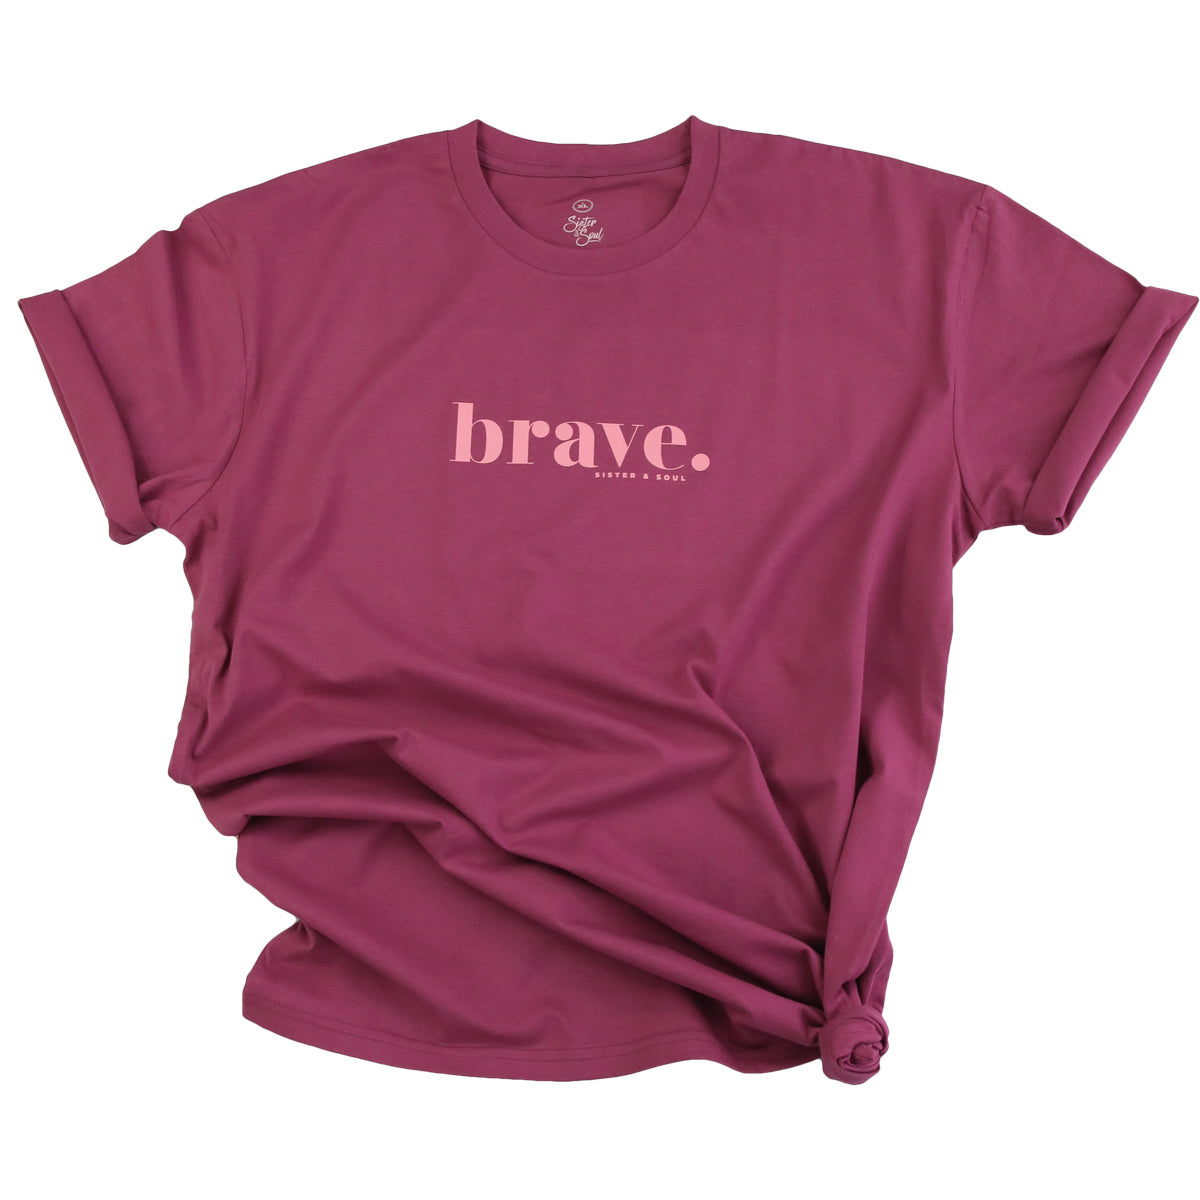 Plus size berry pink Brave tee.